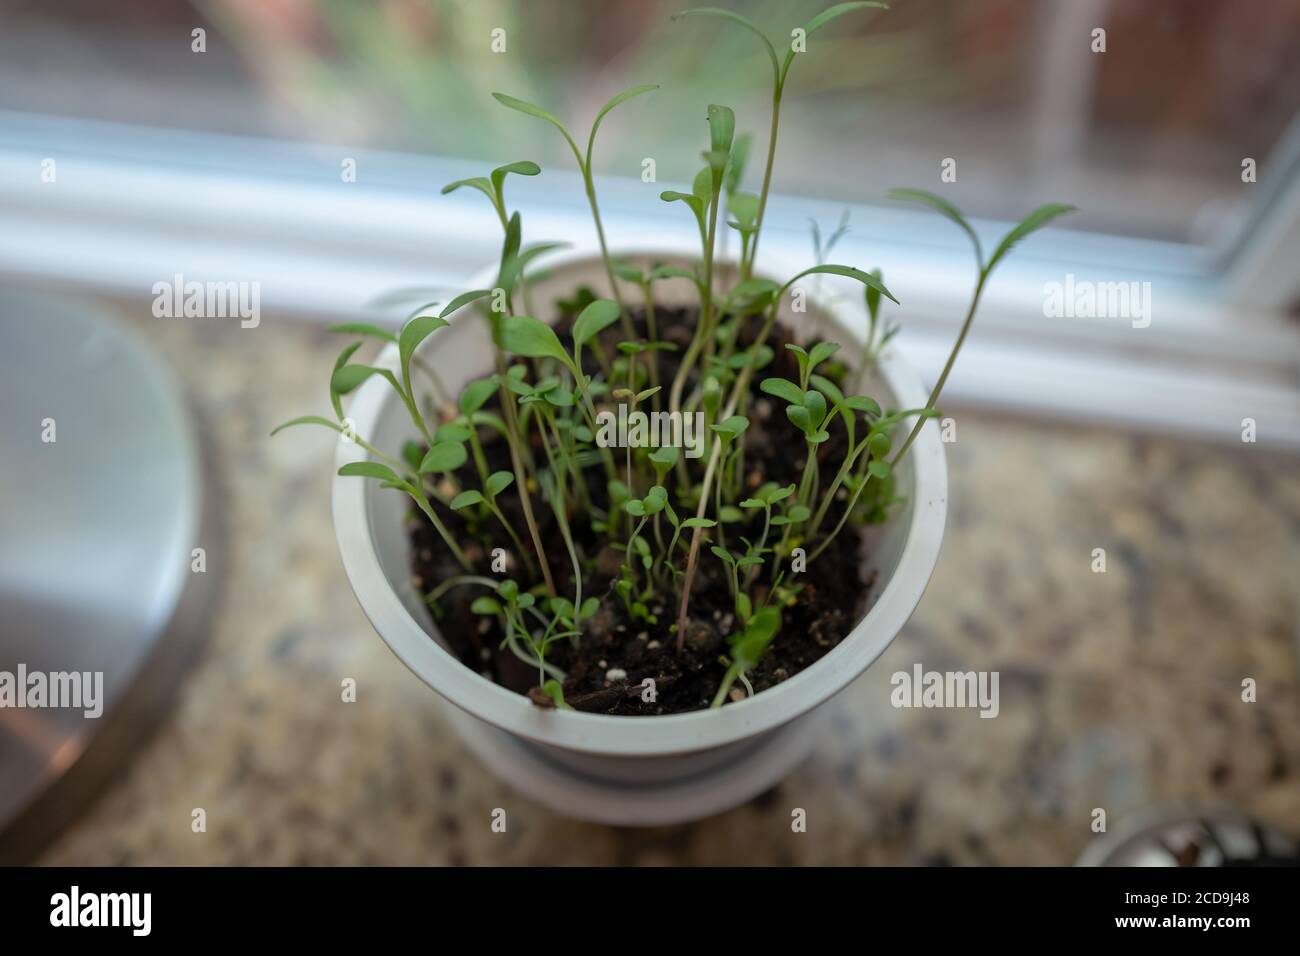 Microcup farm with plant sprouts, an example of a waste plastics reuse product from Annie's Homegrown food company, San Ramon, California, May 27, 2020. () Stock Photo